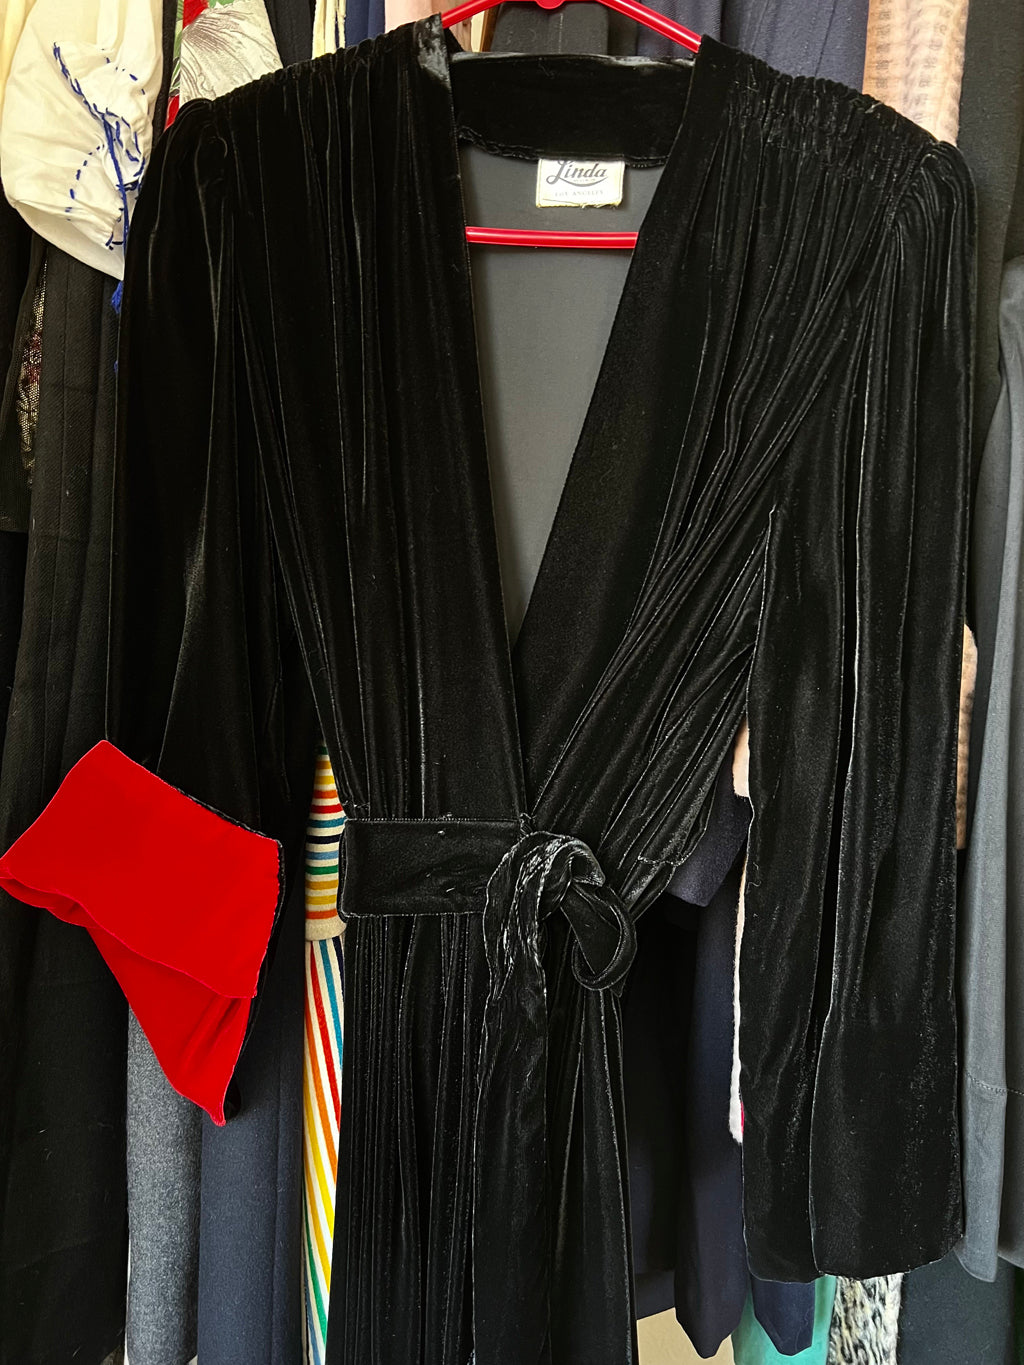 Vintage 1940s Dressing Gown - BLACK WIDOW Rayon Jersey Colorblock Strong Shoulder Wrap Robe w Blood Red Cuffs Fits Many